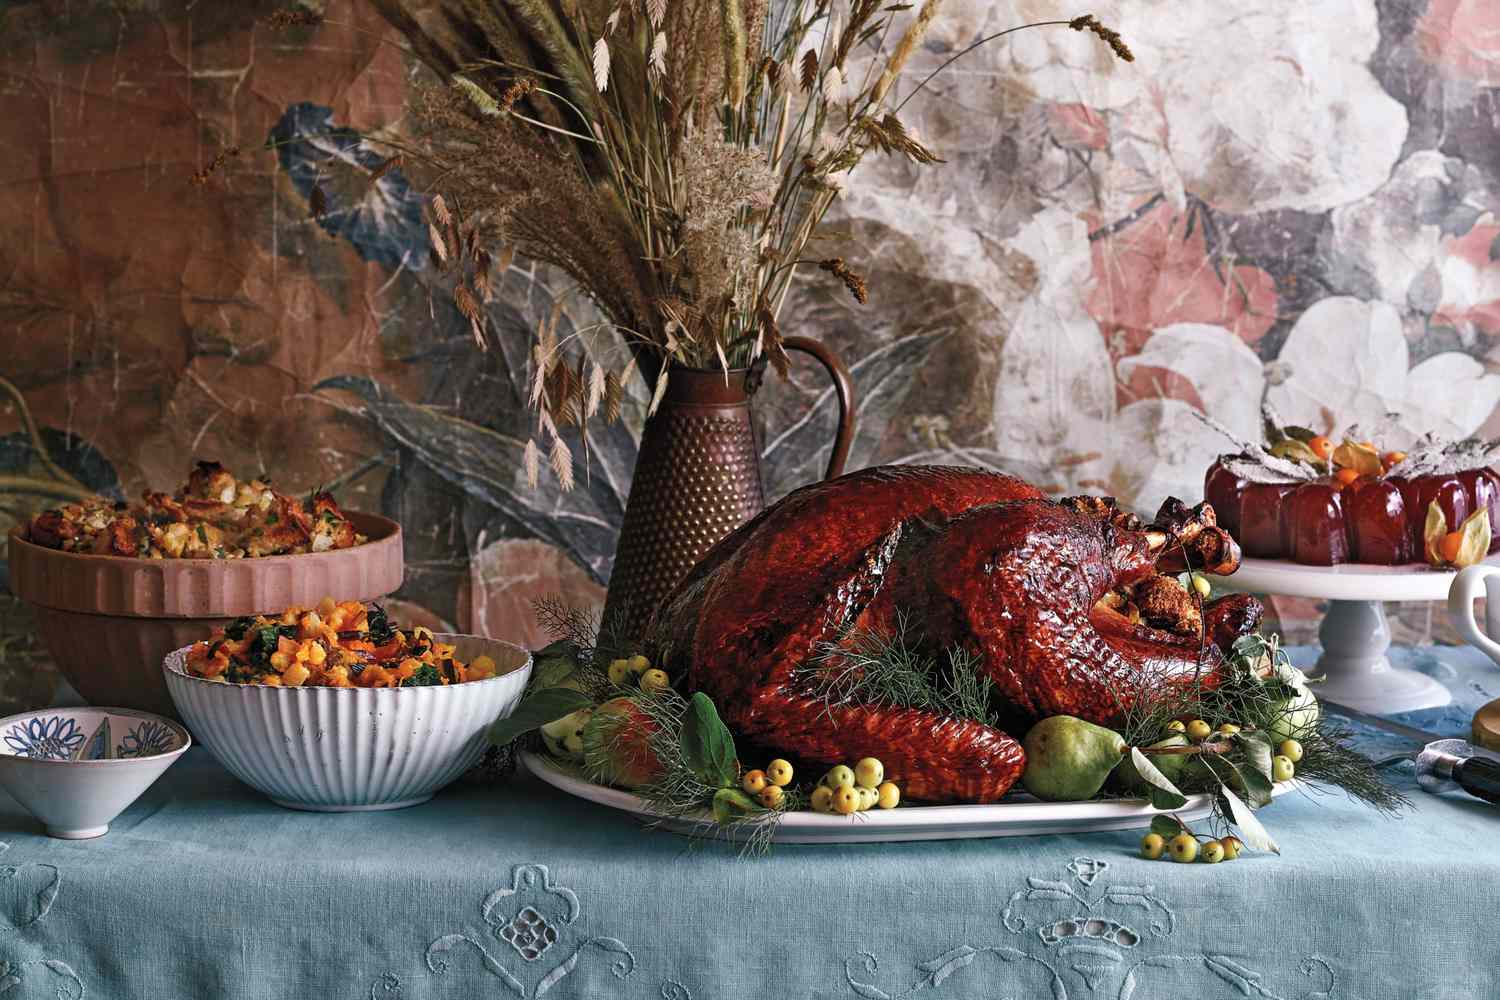 Thanksgiving day spread with dishes and food